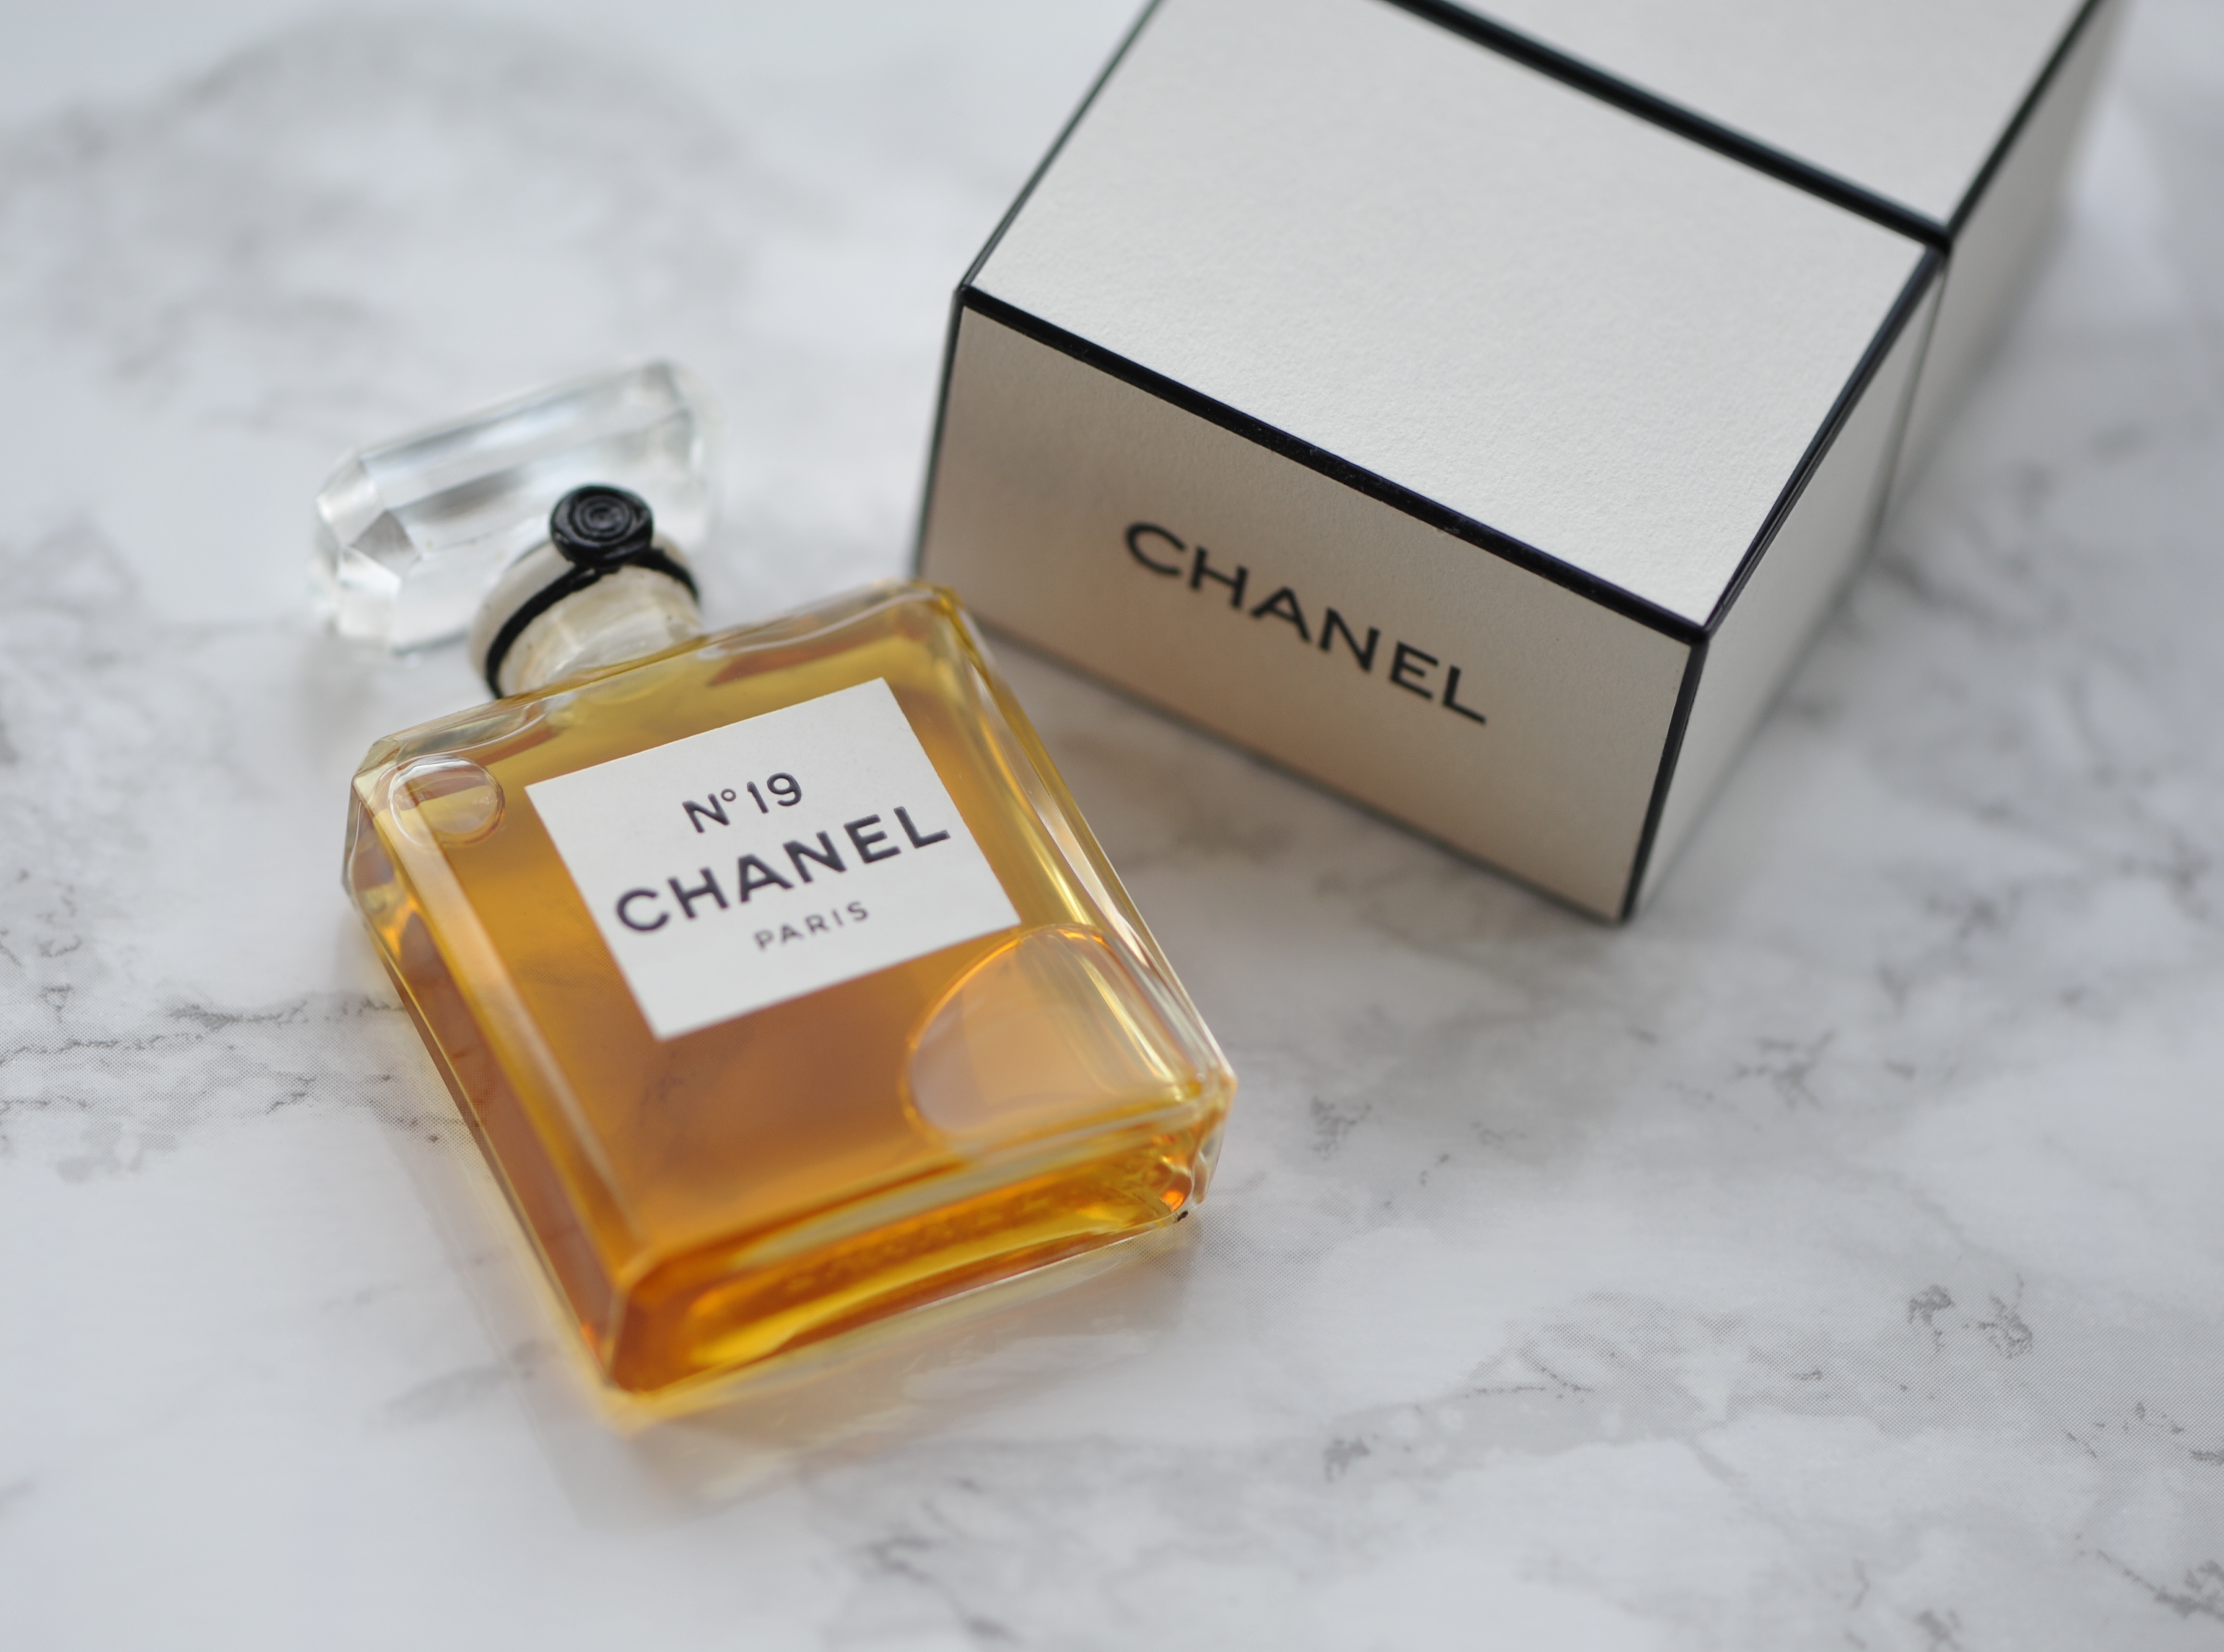 Chanel No. 19 and The 